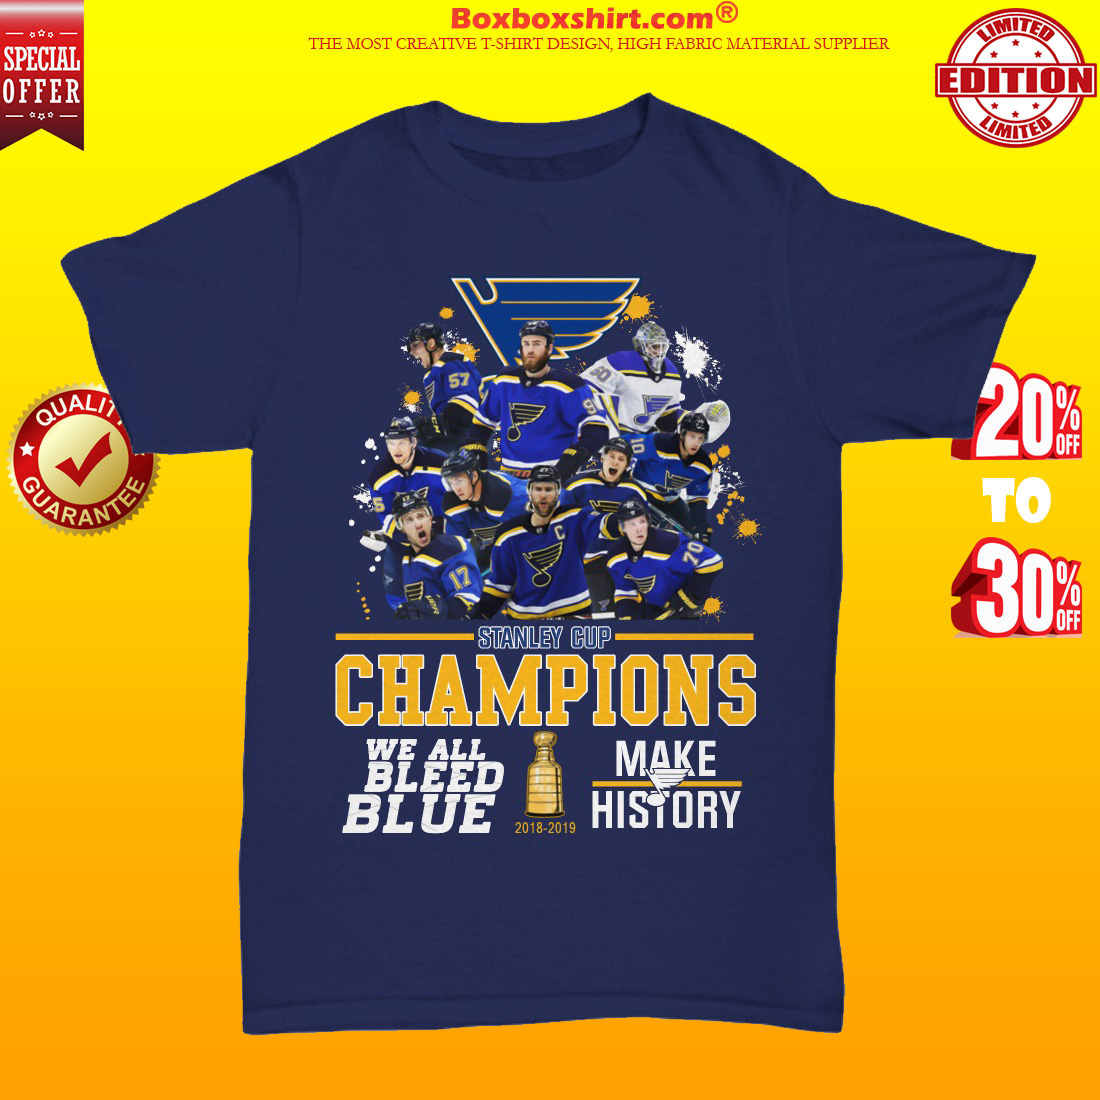 Stanley cup champions we all bleed blue make history unisex tee shirt